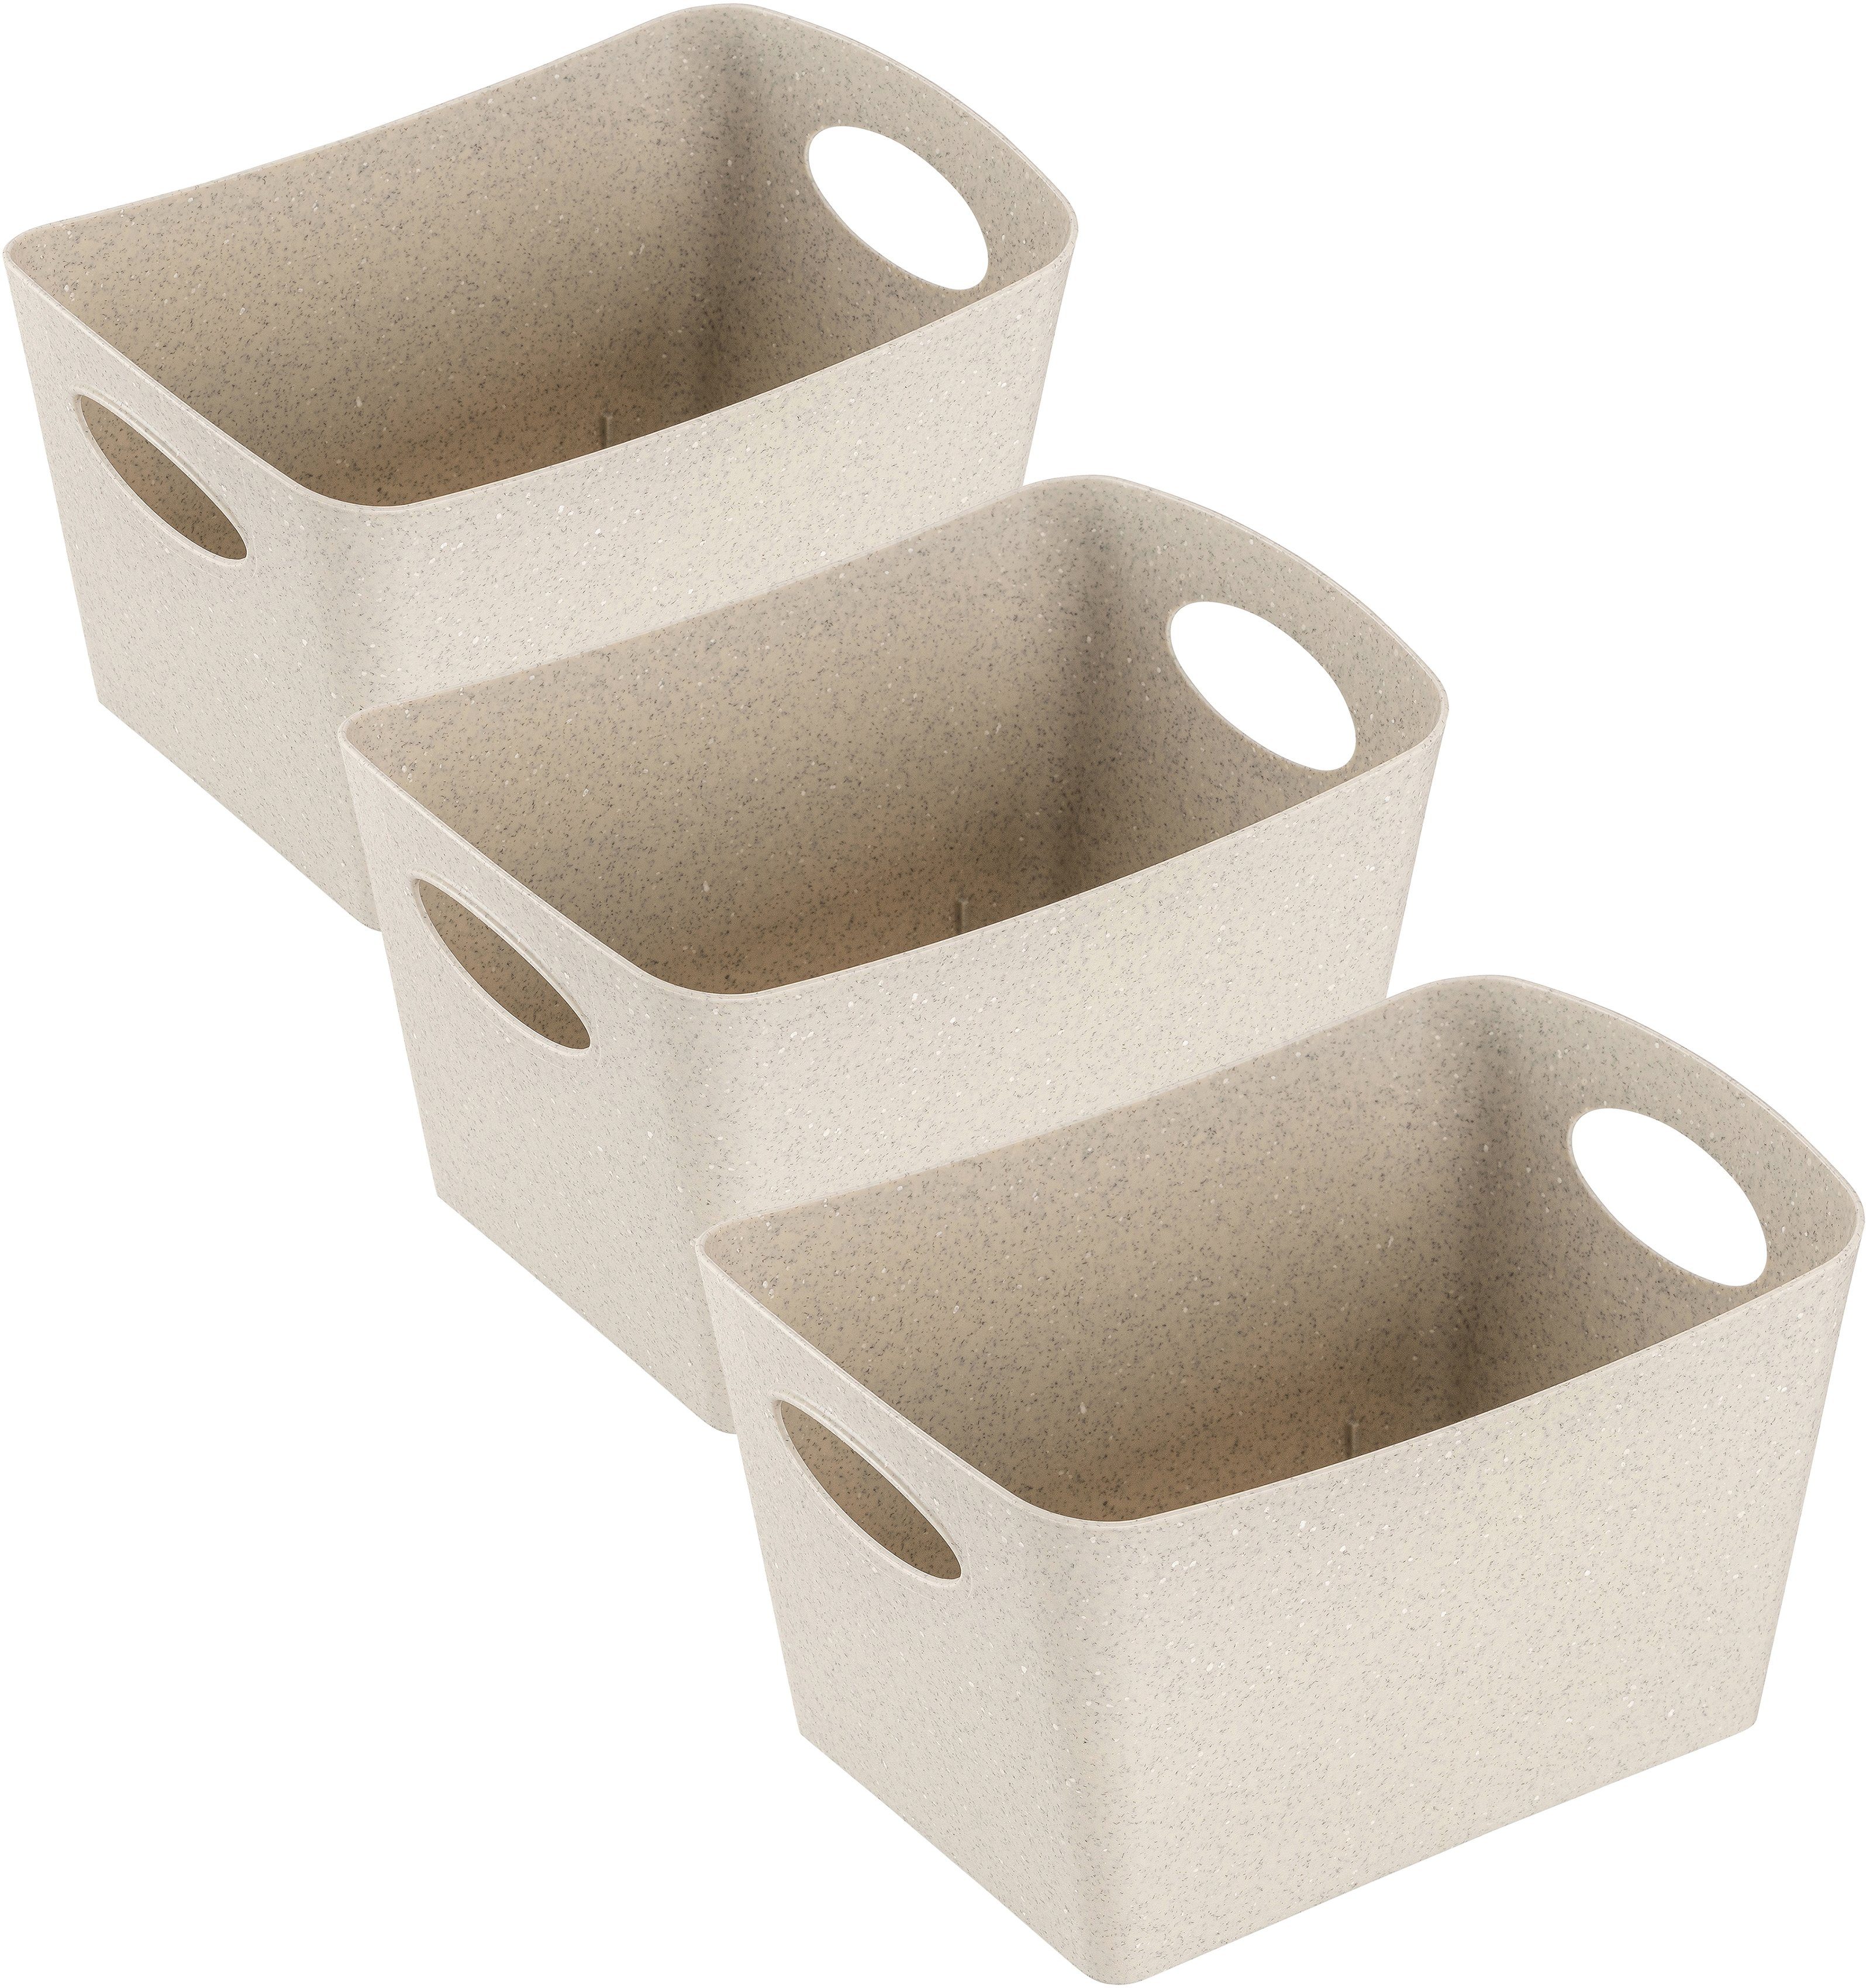 in S sand KOZIOL desert recyceltes Germany, Aufbewahrungsbox, Made Liter BOXXX Organizer Material, 1 100% recycled St), 3 (Set,